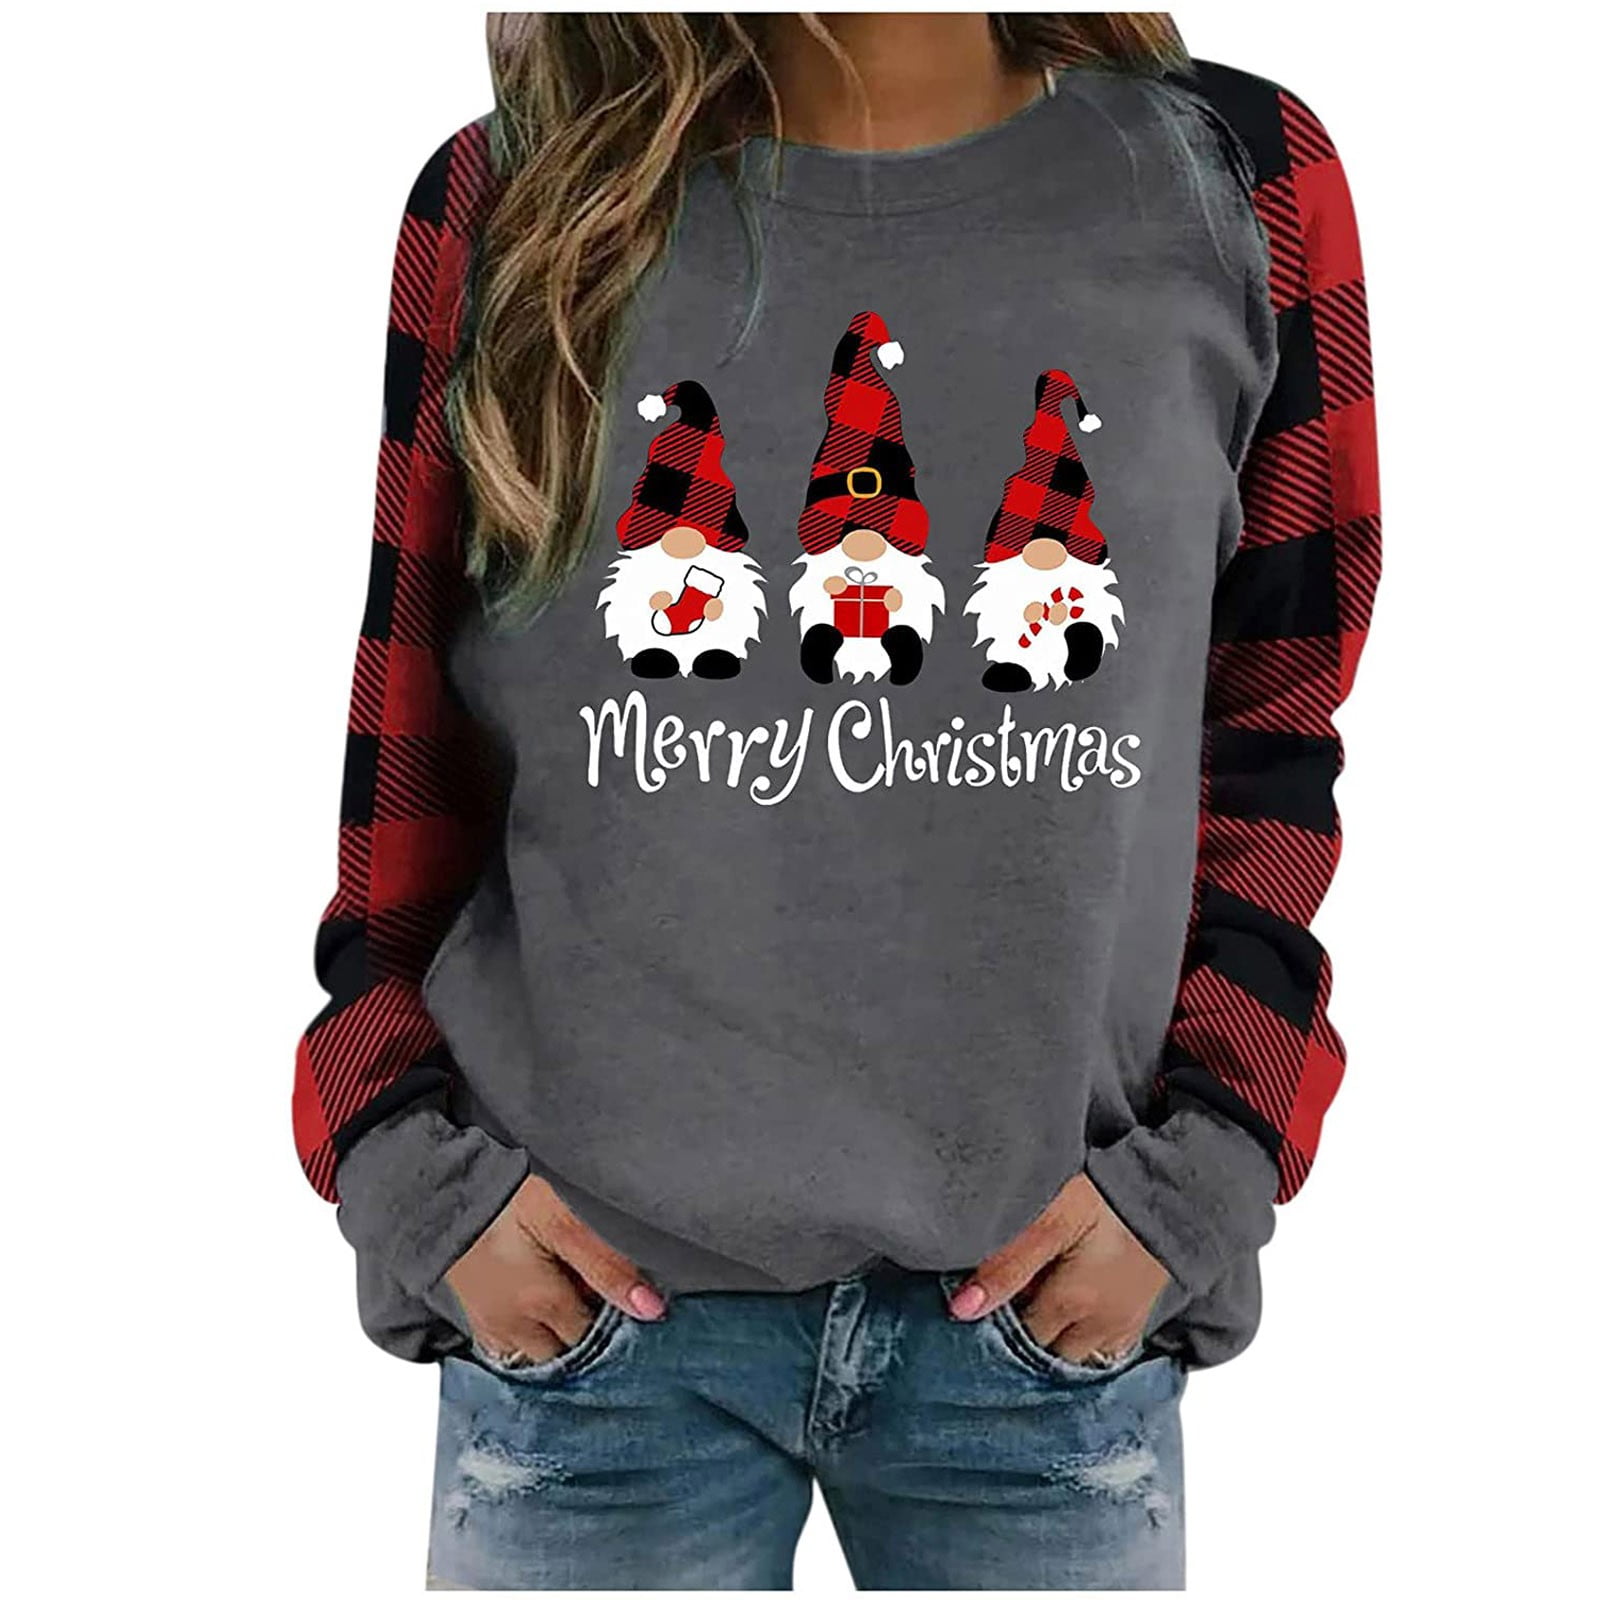 Christmas Long Sleeve Shirts for Women Plus Size Trendy Crewneck Sweatshirts Gnome Reindeer Graphic Plaid Splicing Tops